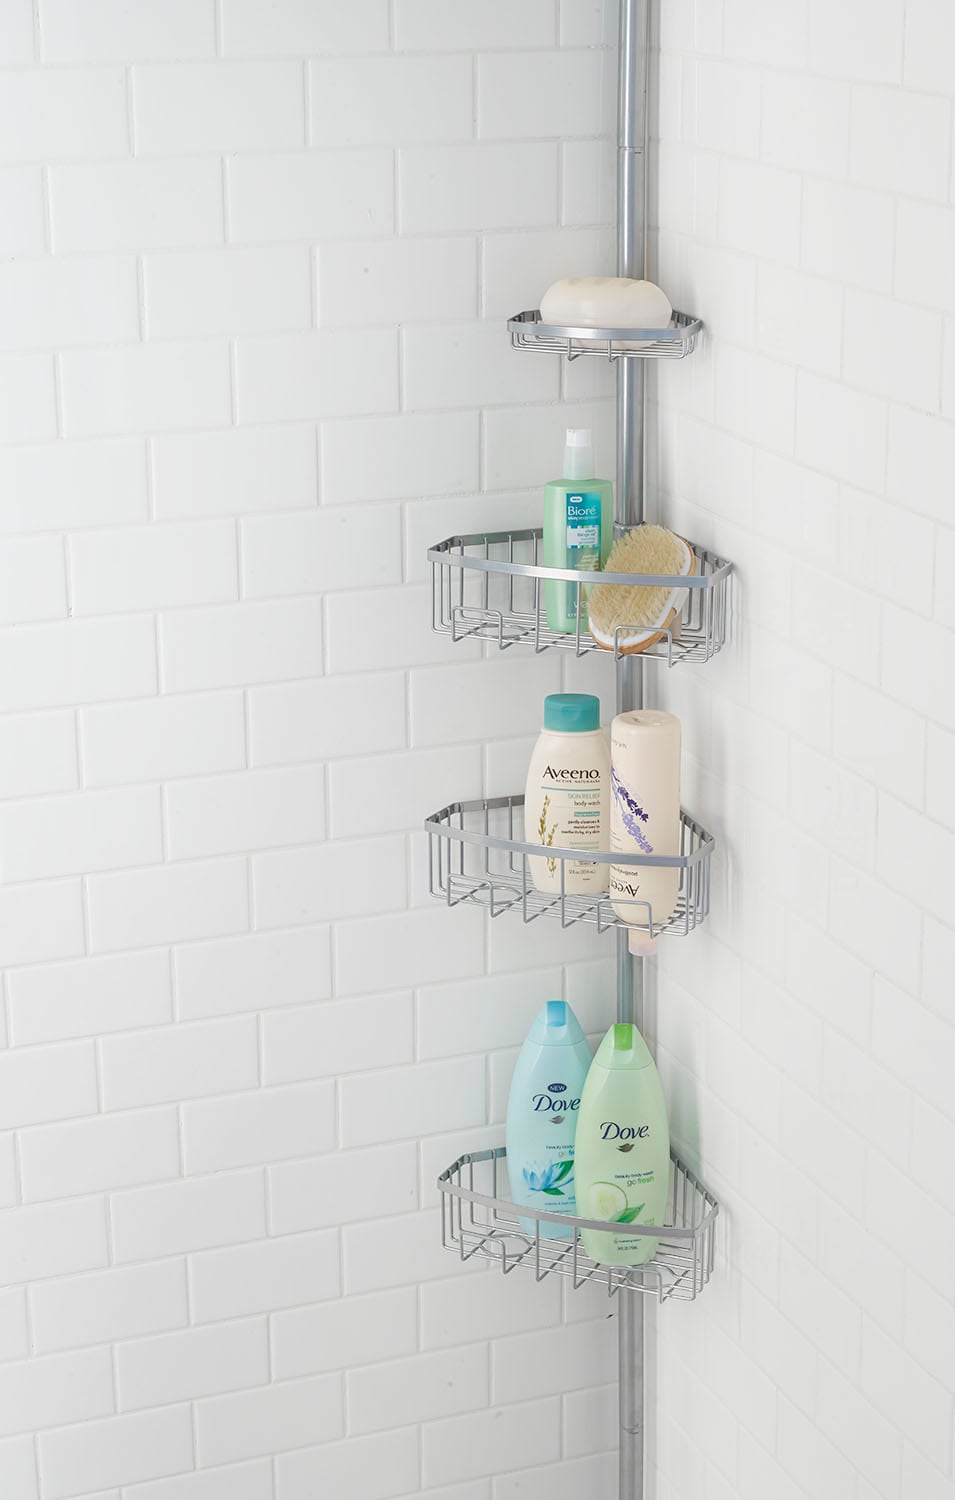 Uniware Chrome Plated Shower Caddy , Rust Resistant